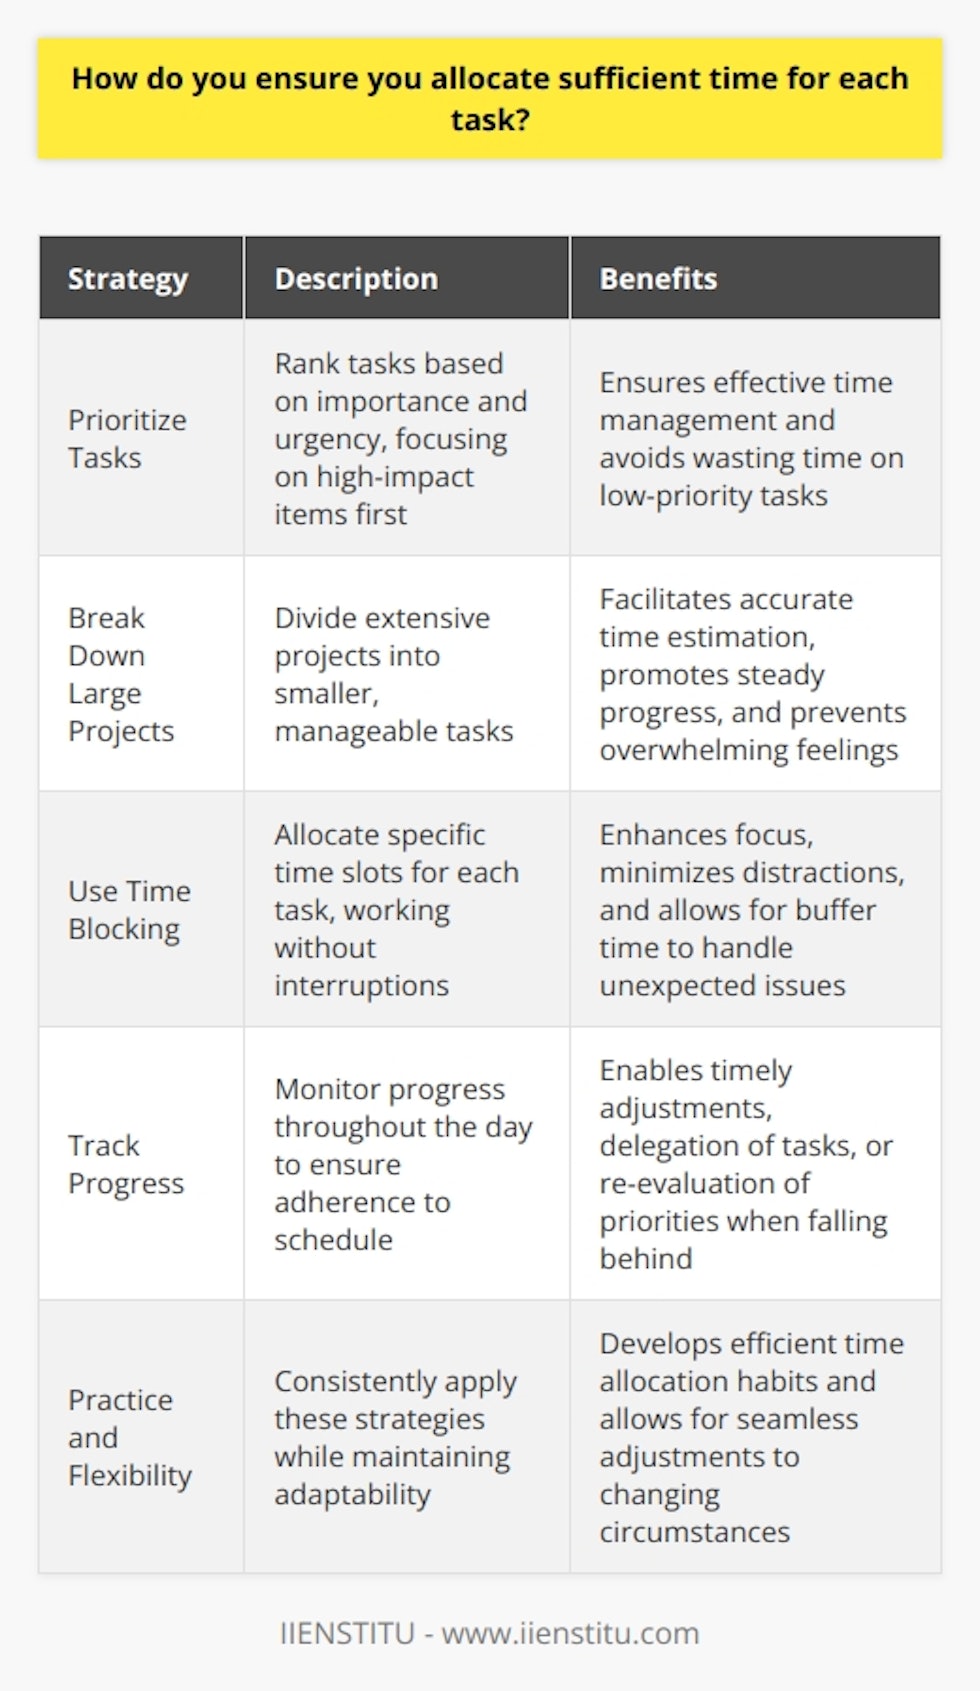 When it comes to allocating sufficient time for each task, I have a few strategies that help me stay on top of my workload. Prioritize Tasks First, I prioritize my tasks based on their importance and urgency. I make a list of everything I need to accomplish and then rank them from most critical to least important. This helps me focus on the tasks that will have the biggest impact on my work and ensures that Im not wasting time on low-priority items. Break Down Large Projects For larger projects, I break them down into smaller, more manageable tasks. This makes it easier to estimate how much time each part will take and ensures that Im making steady progress towards the end goal. It also helps me avoid feeling overwhelmed by the scope of the project. Use Time Blocking Another strategy I use is time blocking. I set aside specific chunks of time for each task on my list and work on them without interruption. This helps me stay focused and avoid distractions. I also build in buffer time for unexpected issues or delays. Track My Progress Finally, I track my progress throughout the day to ensure that Im staying on schedule. If I find that Im falling behind, I adjust my plan accordingly. This might mean delegating tasks to others or re-evaluating my priorities. By using these strategies, Im able to allocate sufficient time for each task and ensure that Im meeting my deadlines consistently. It takes some practice and flexibility, but with time it becomes second nature.